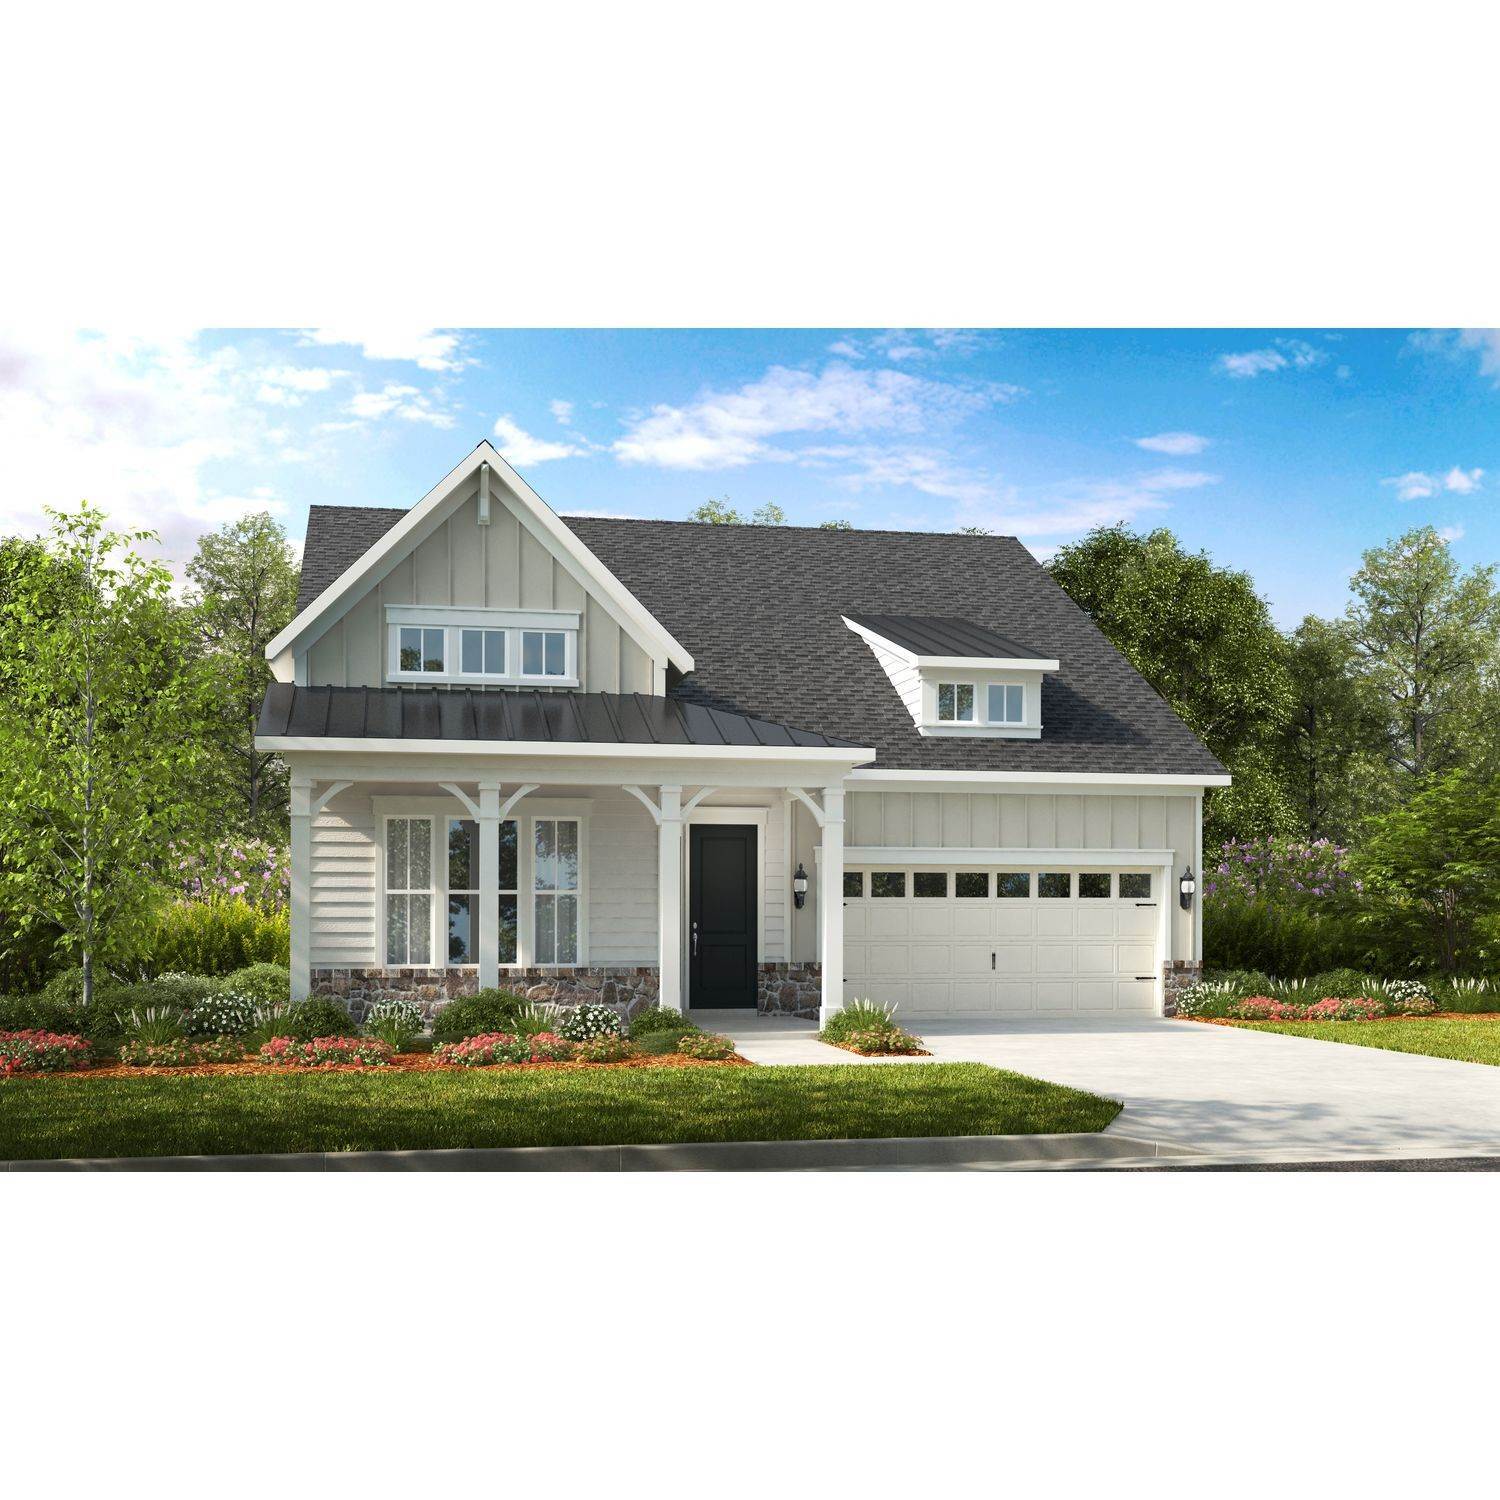 Single Family for Sale at Indian Trail, NC 28079